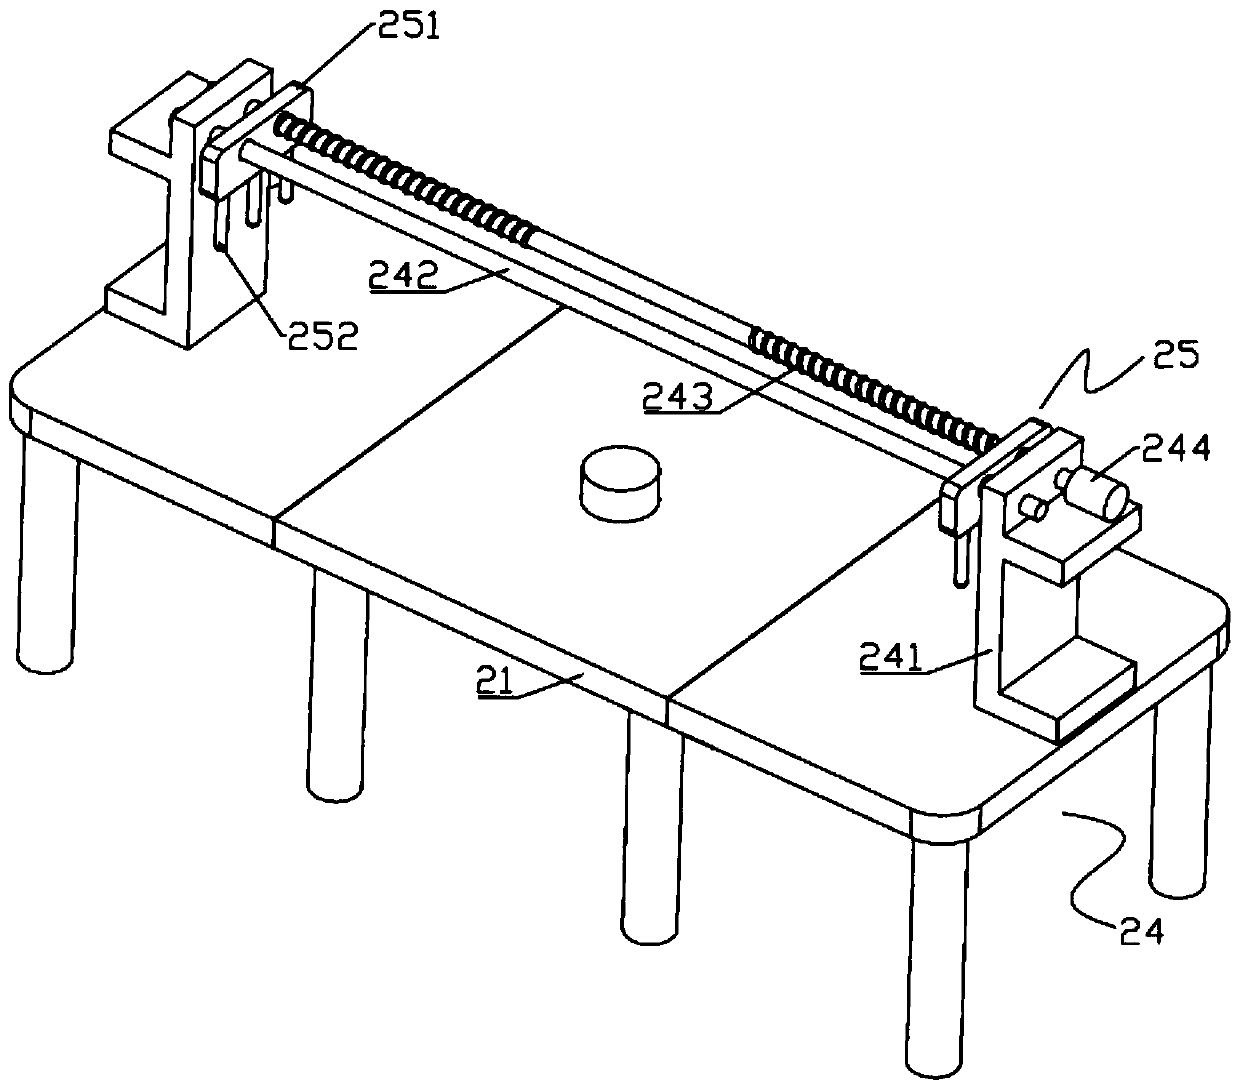 Device for sorting large and small-size packaging boxes for packaging